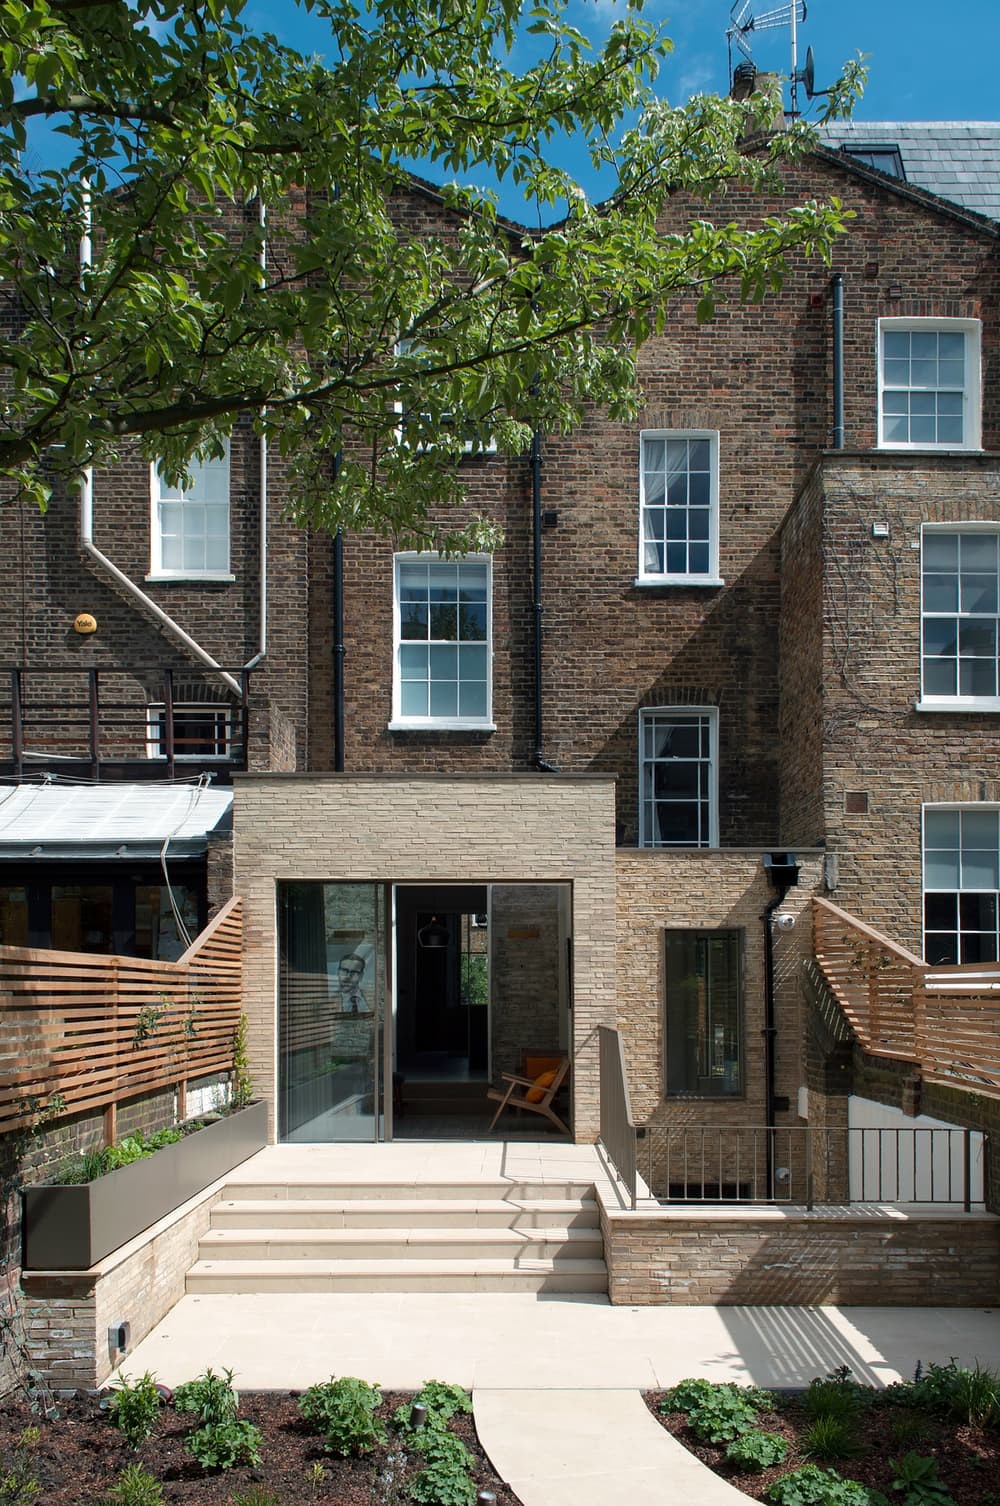 A Grade II Listed Terraced House Transformed into a Contemporary London Home